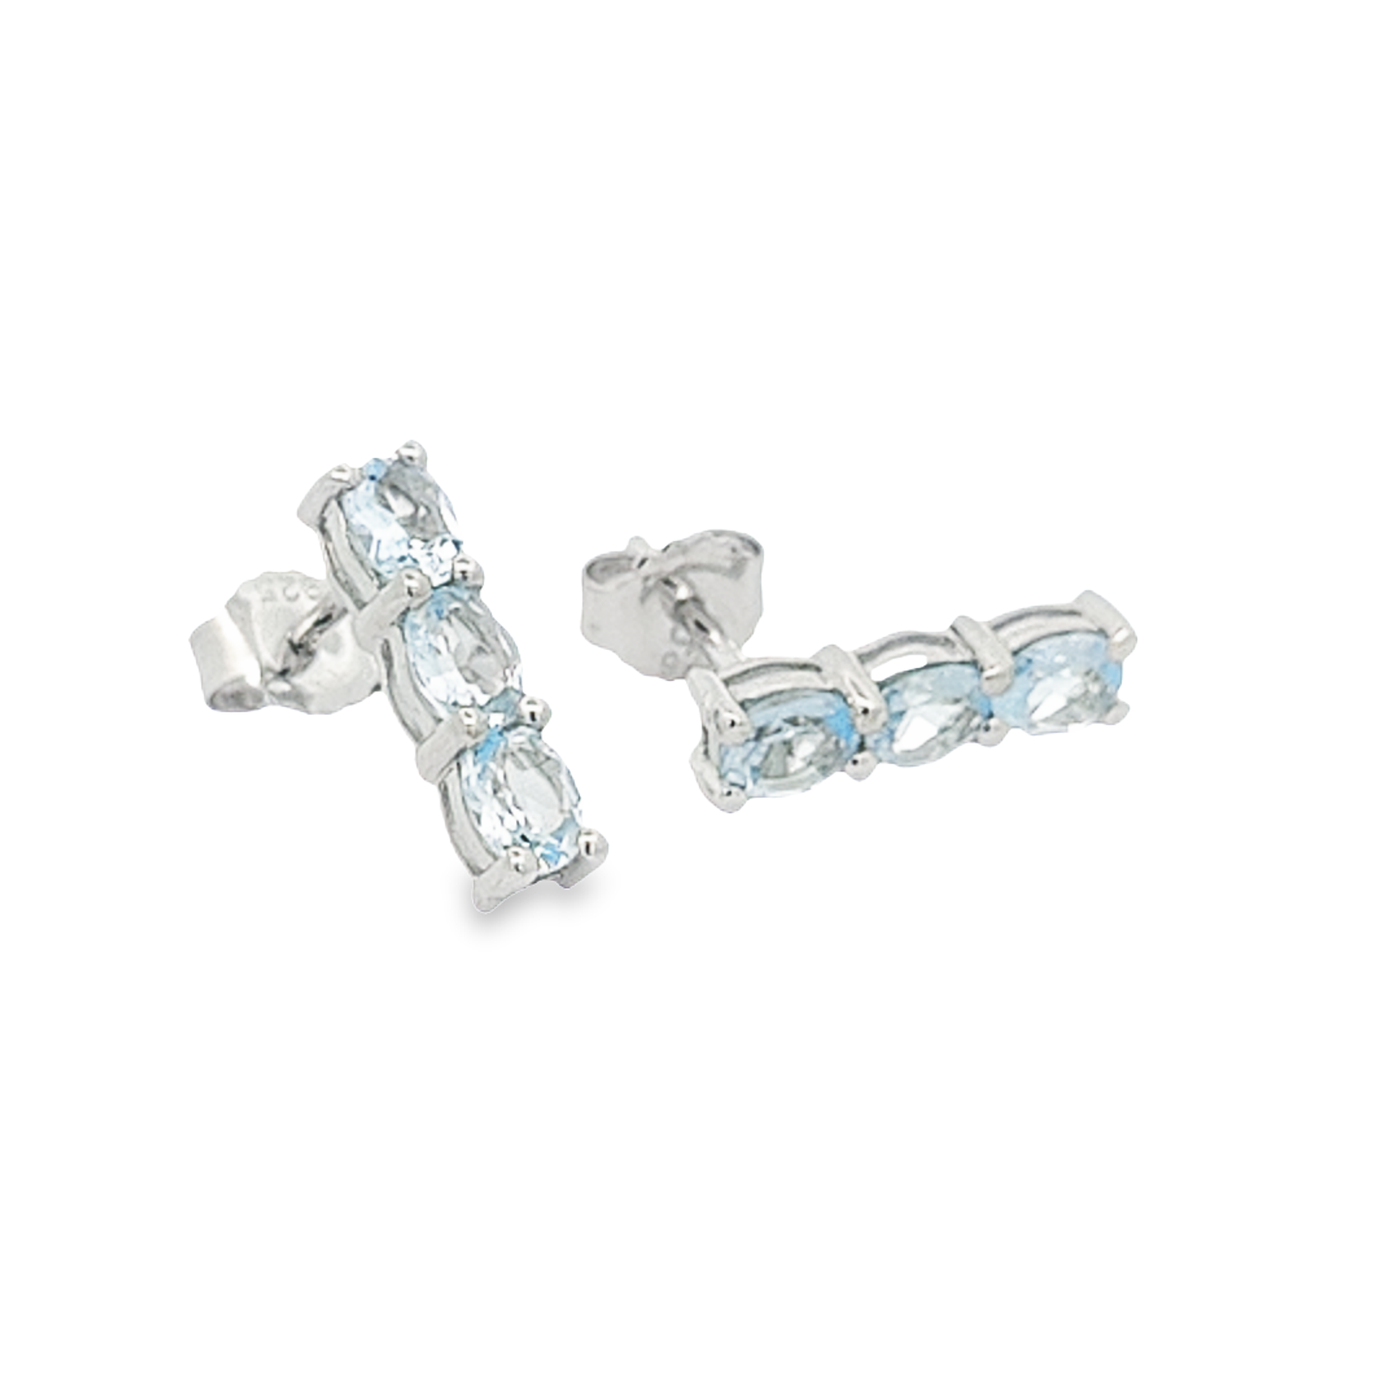 Blue Topaz Earrings - Claire - boothandbooth